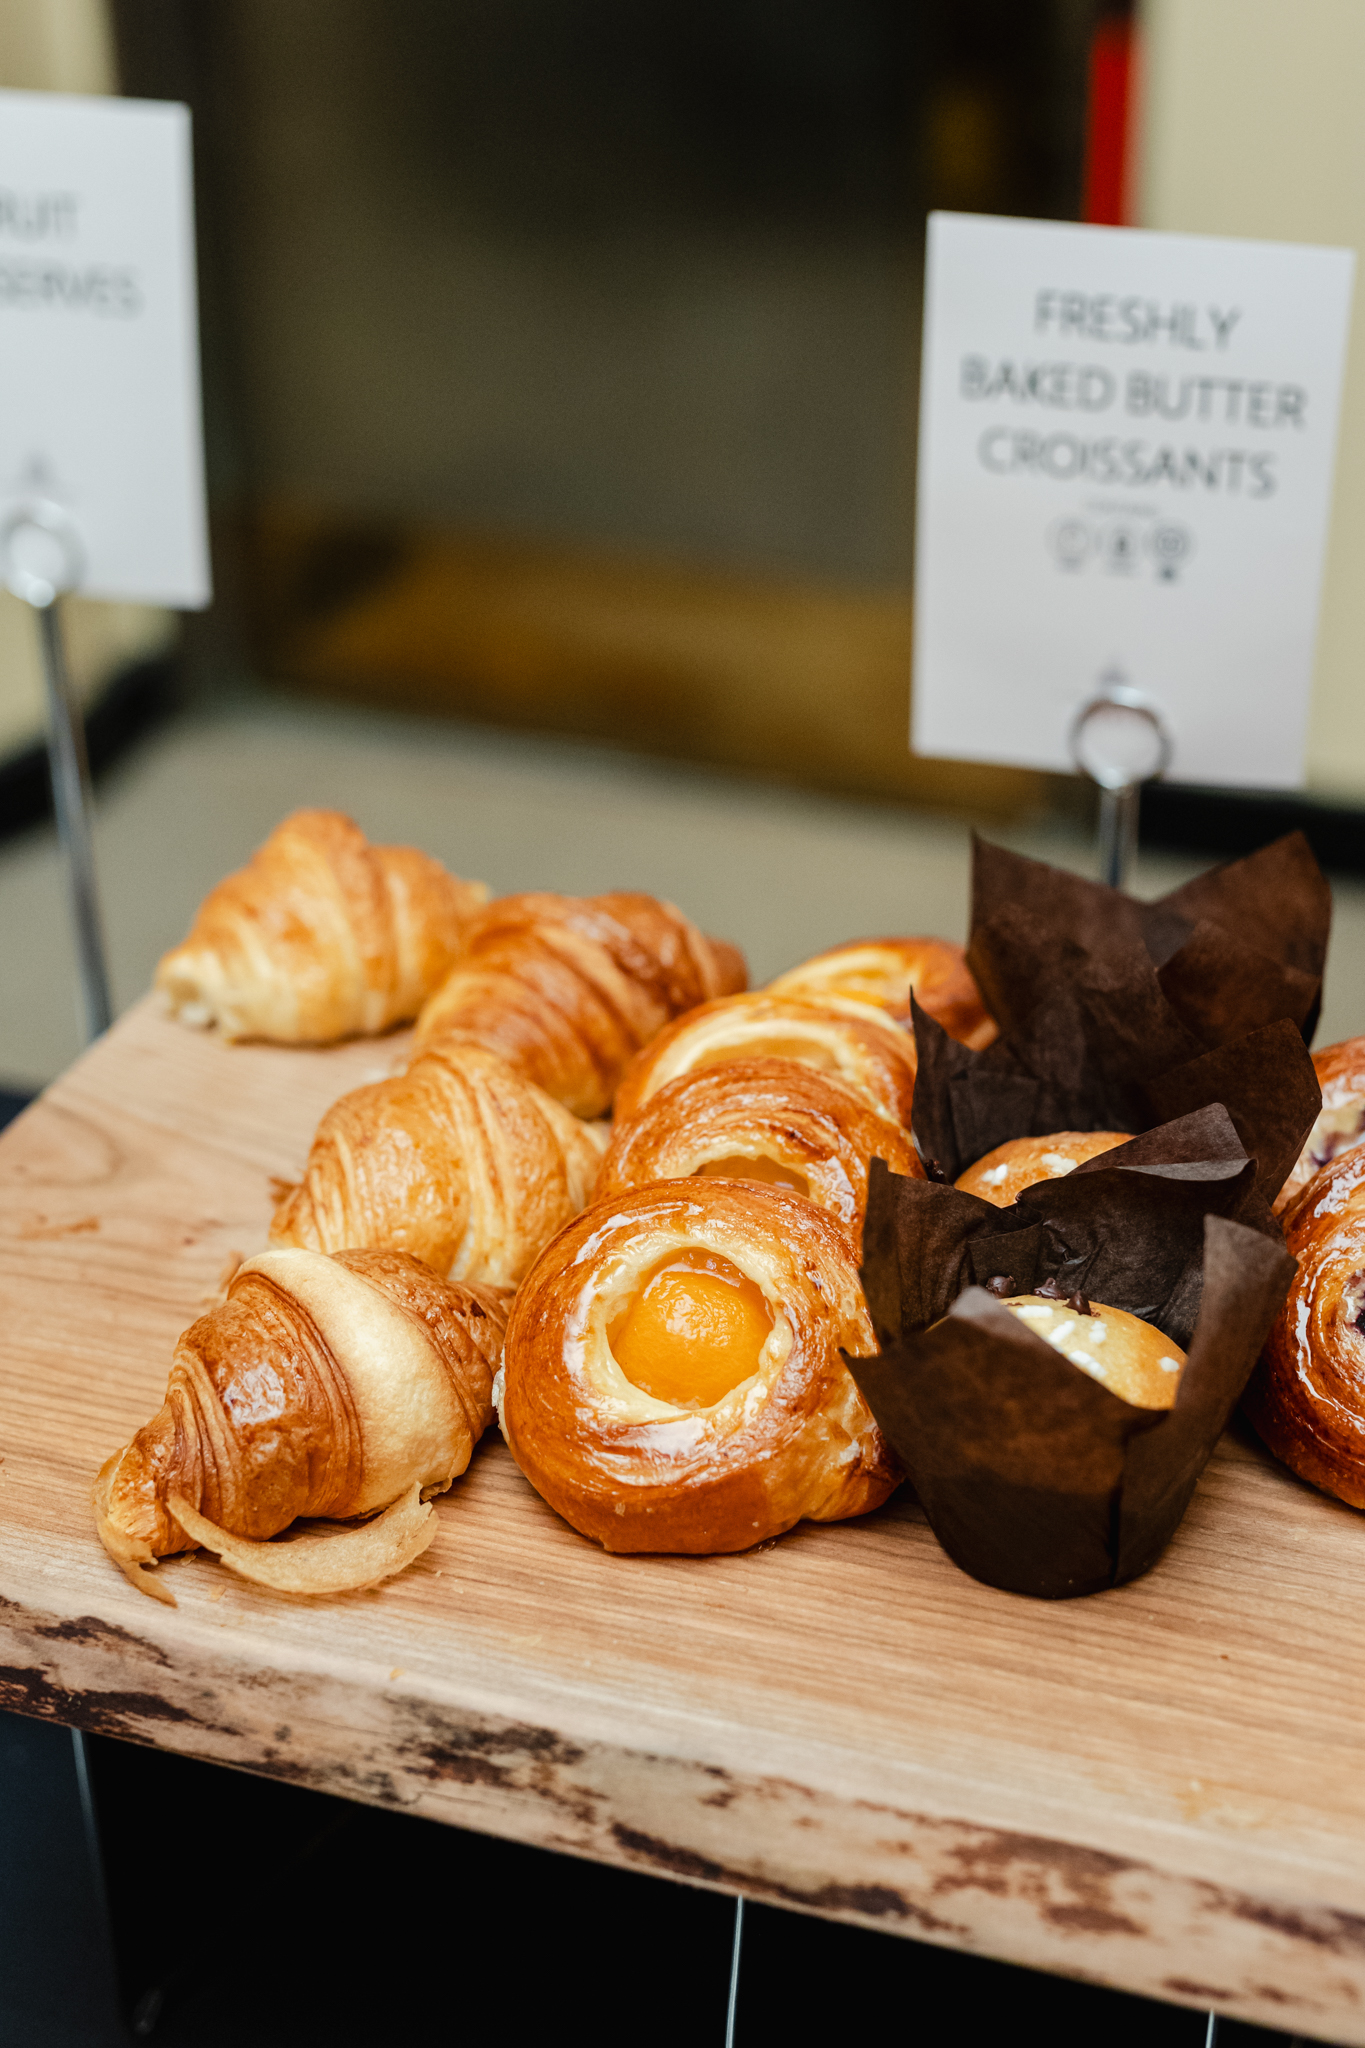 Conference attendees can indulge in a delicious assortment of pastries displayed elegantly on a table.